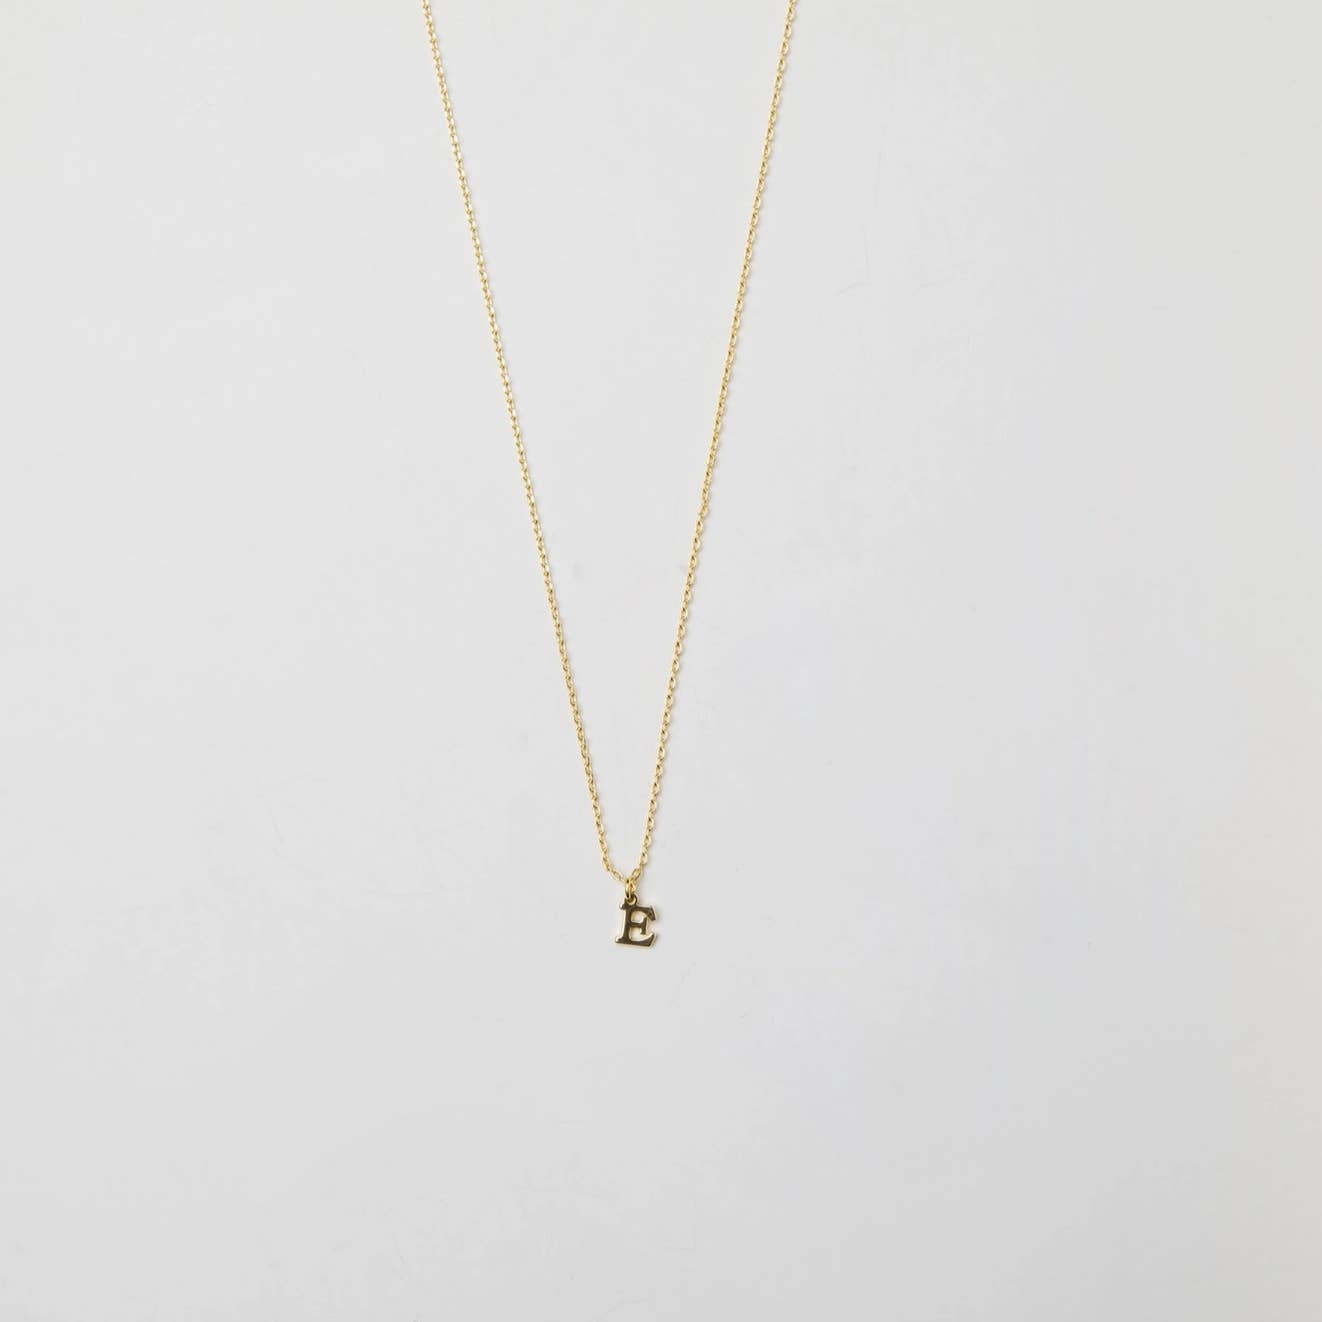 Waterproof Gold Dainty Love Initial Necklace